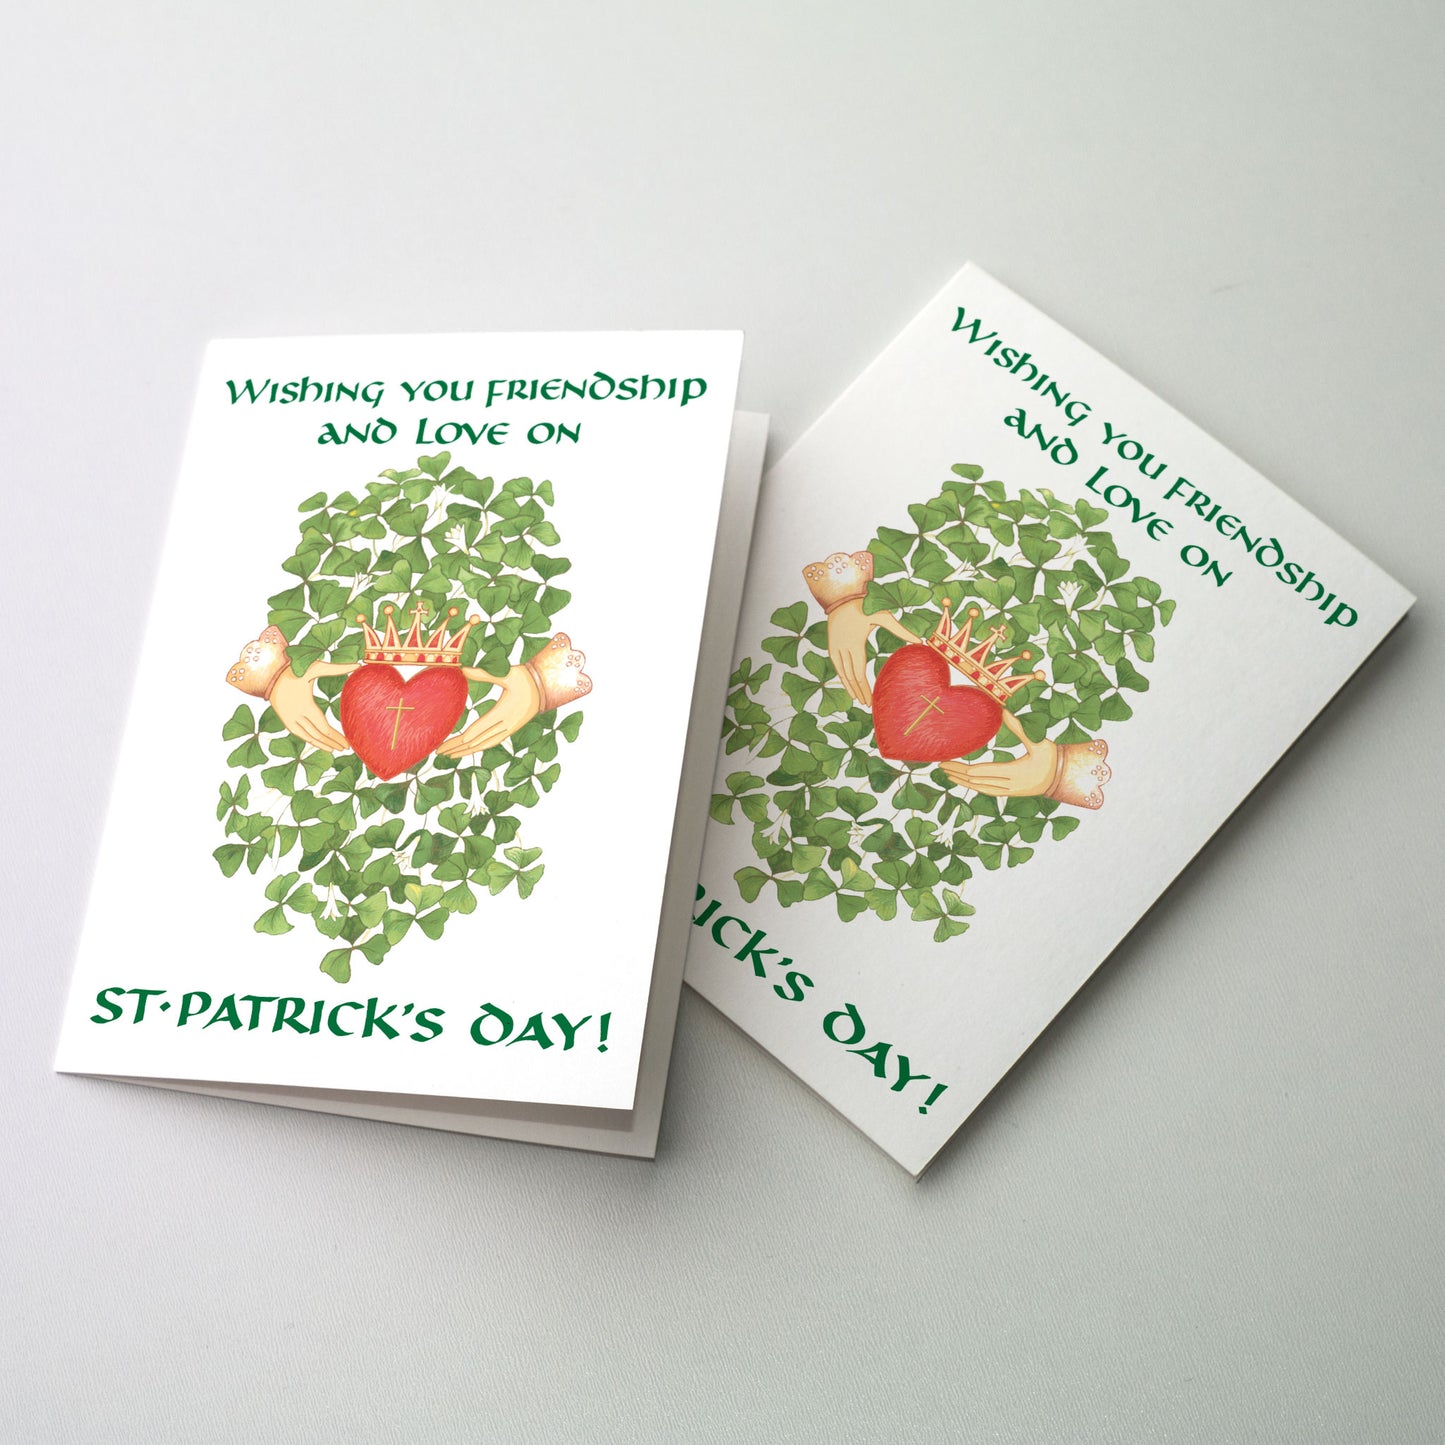 Wishing You Friendship and Love - St. Patrick's Day Card